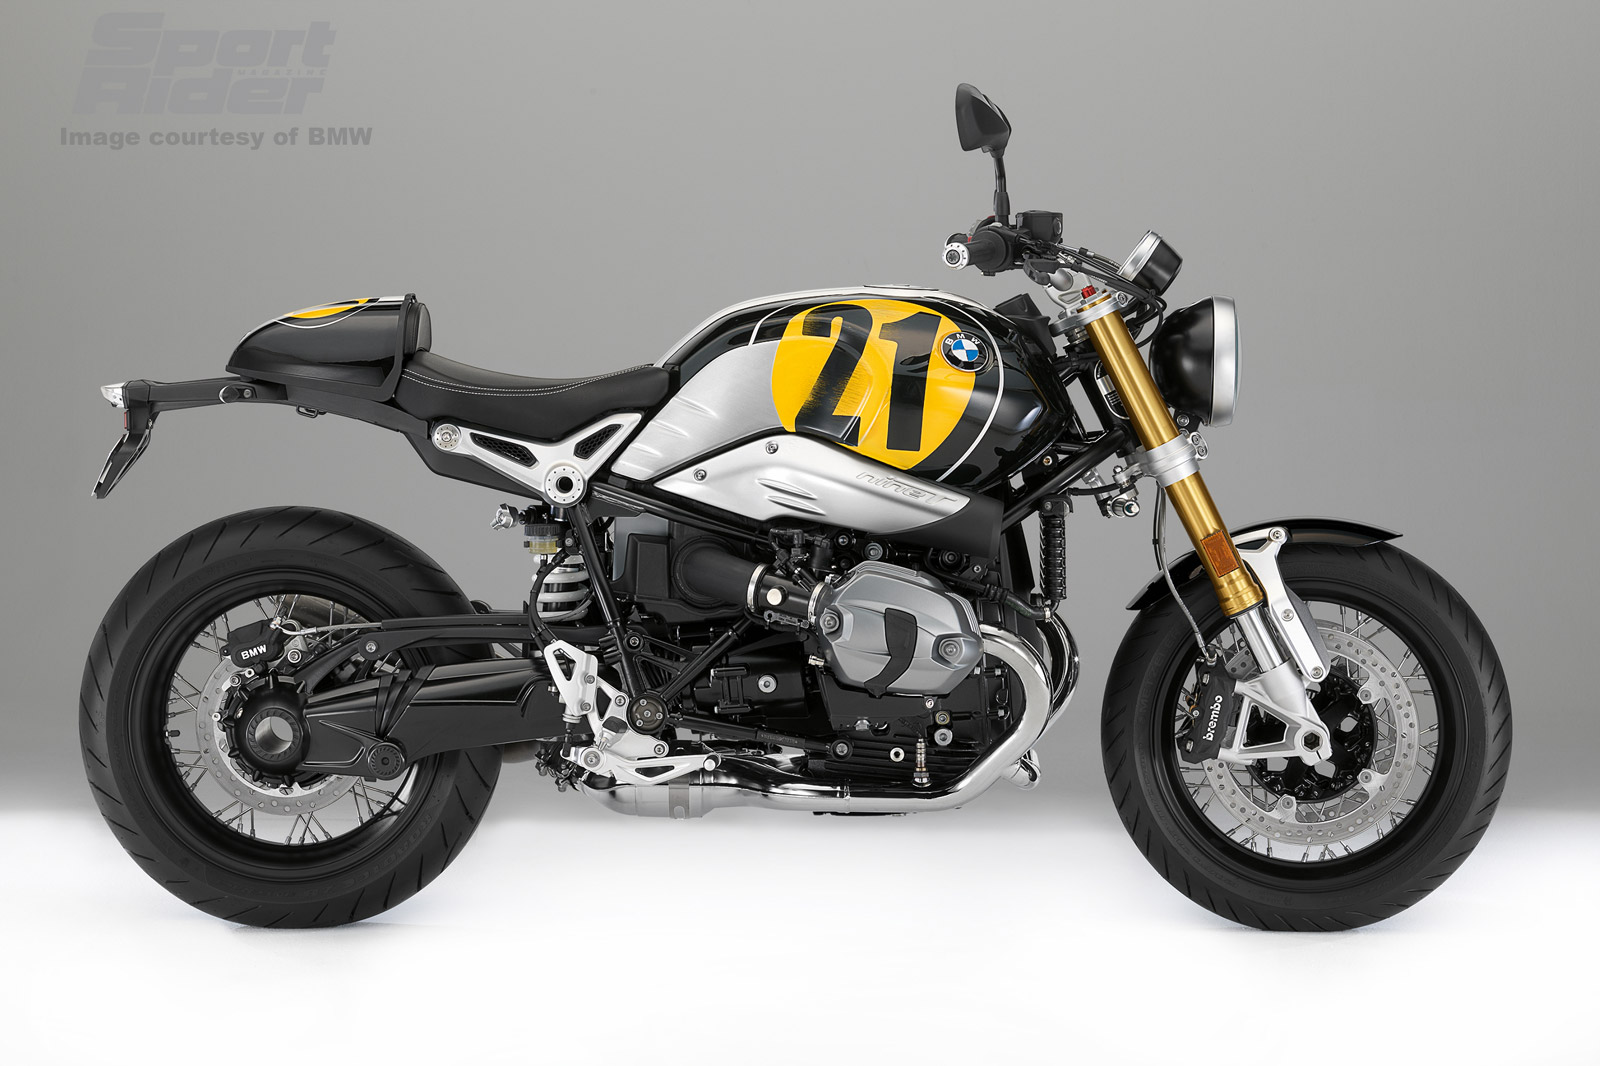 2017 BMW R nineT and R nineT Urban G/S First Look | Cycle World